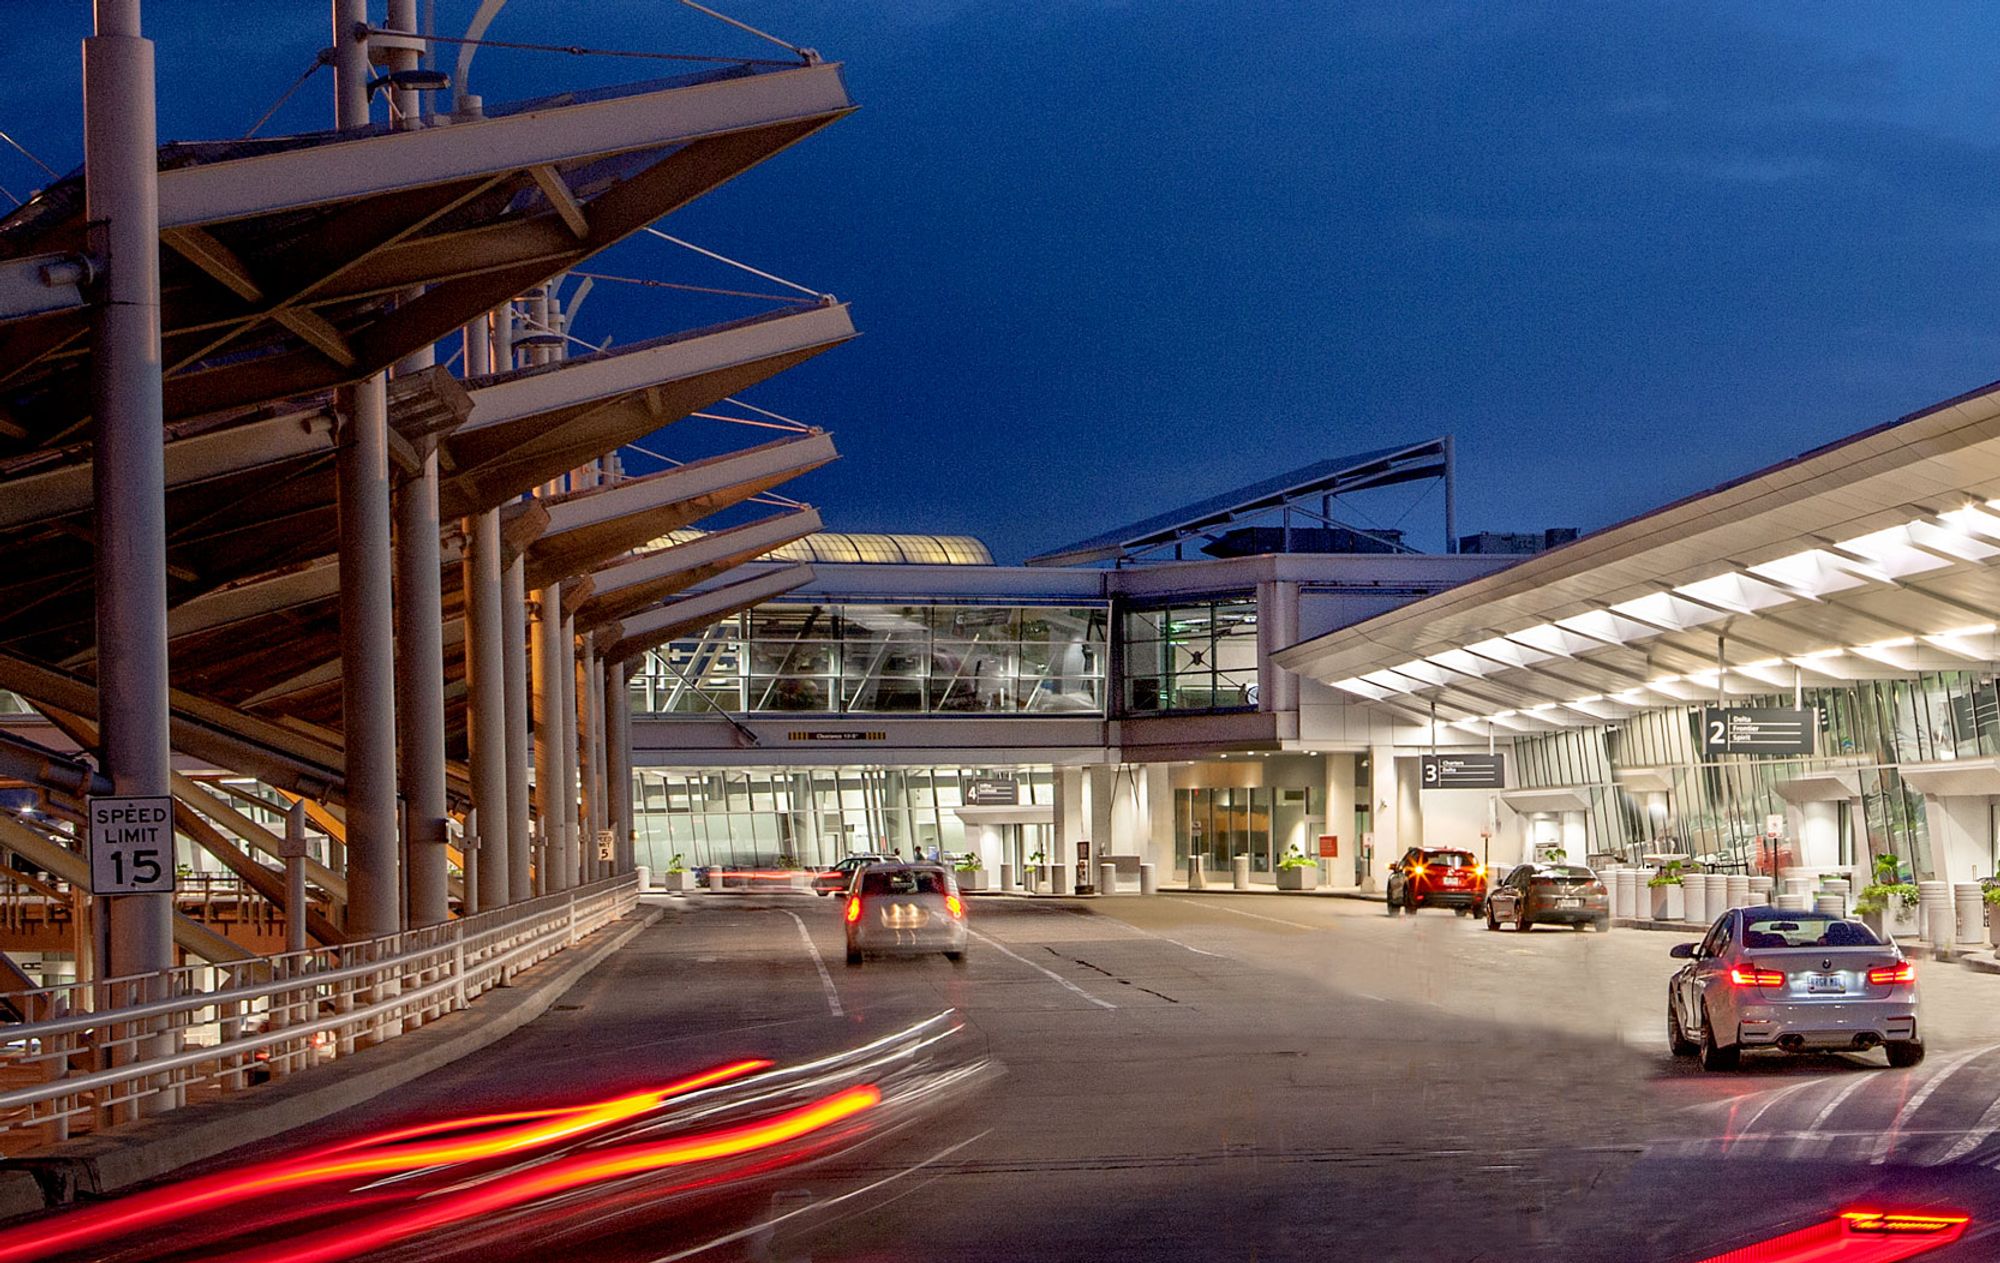 Cleveland Hopkins International Airport (CLE)